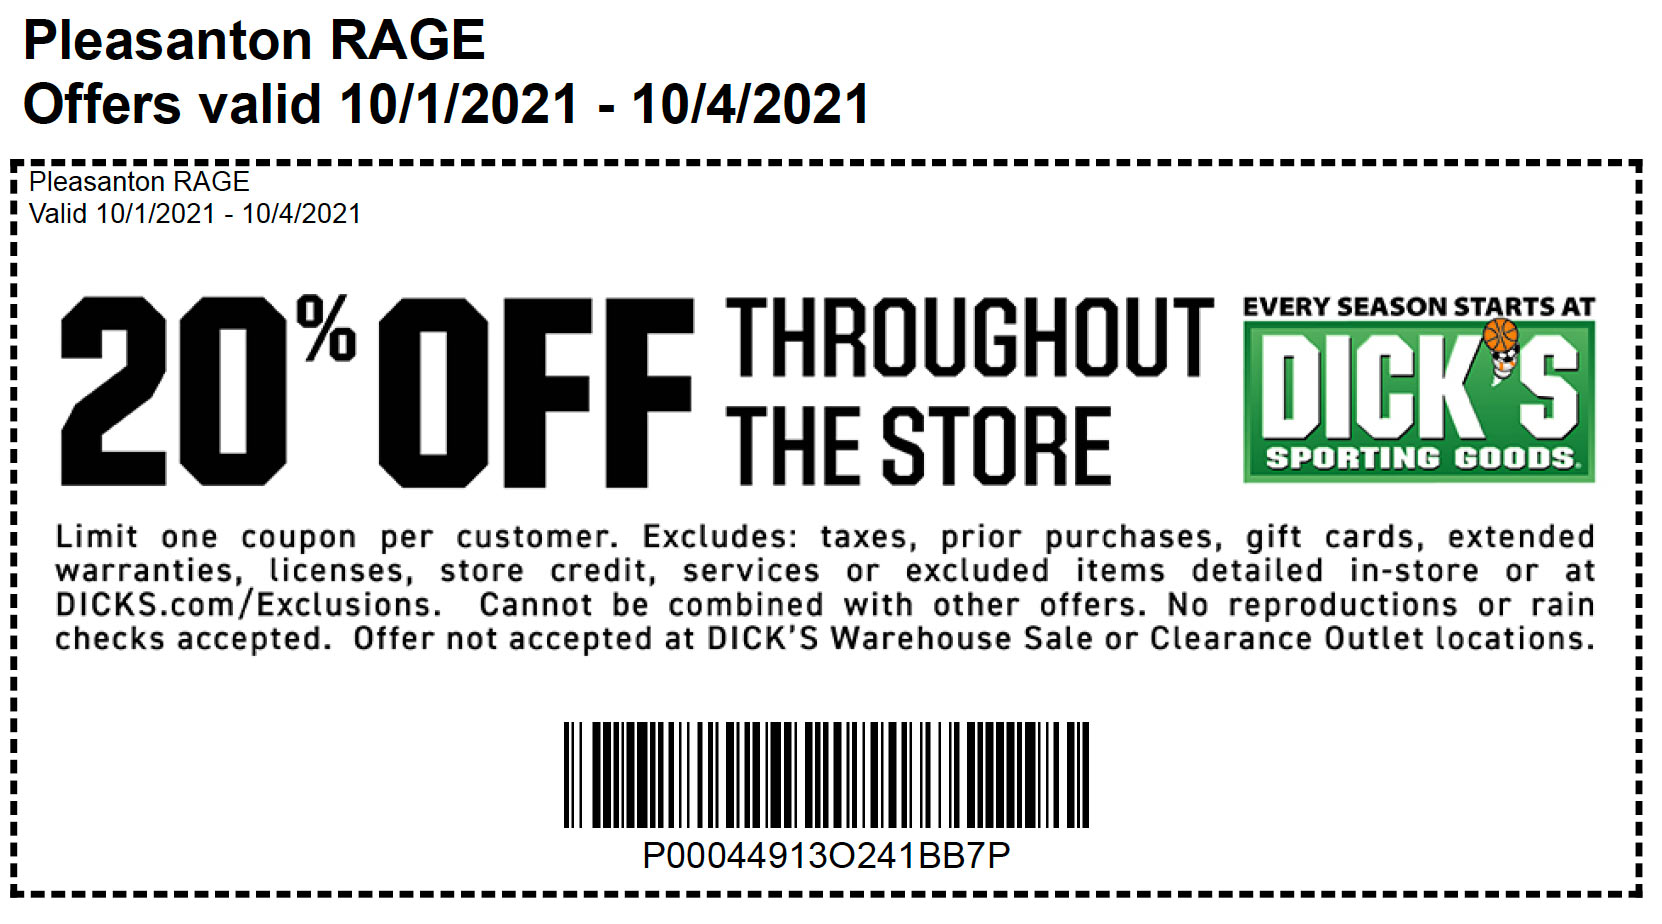 Dicks sporting goods coupon code for free 2 day shipping